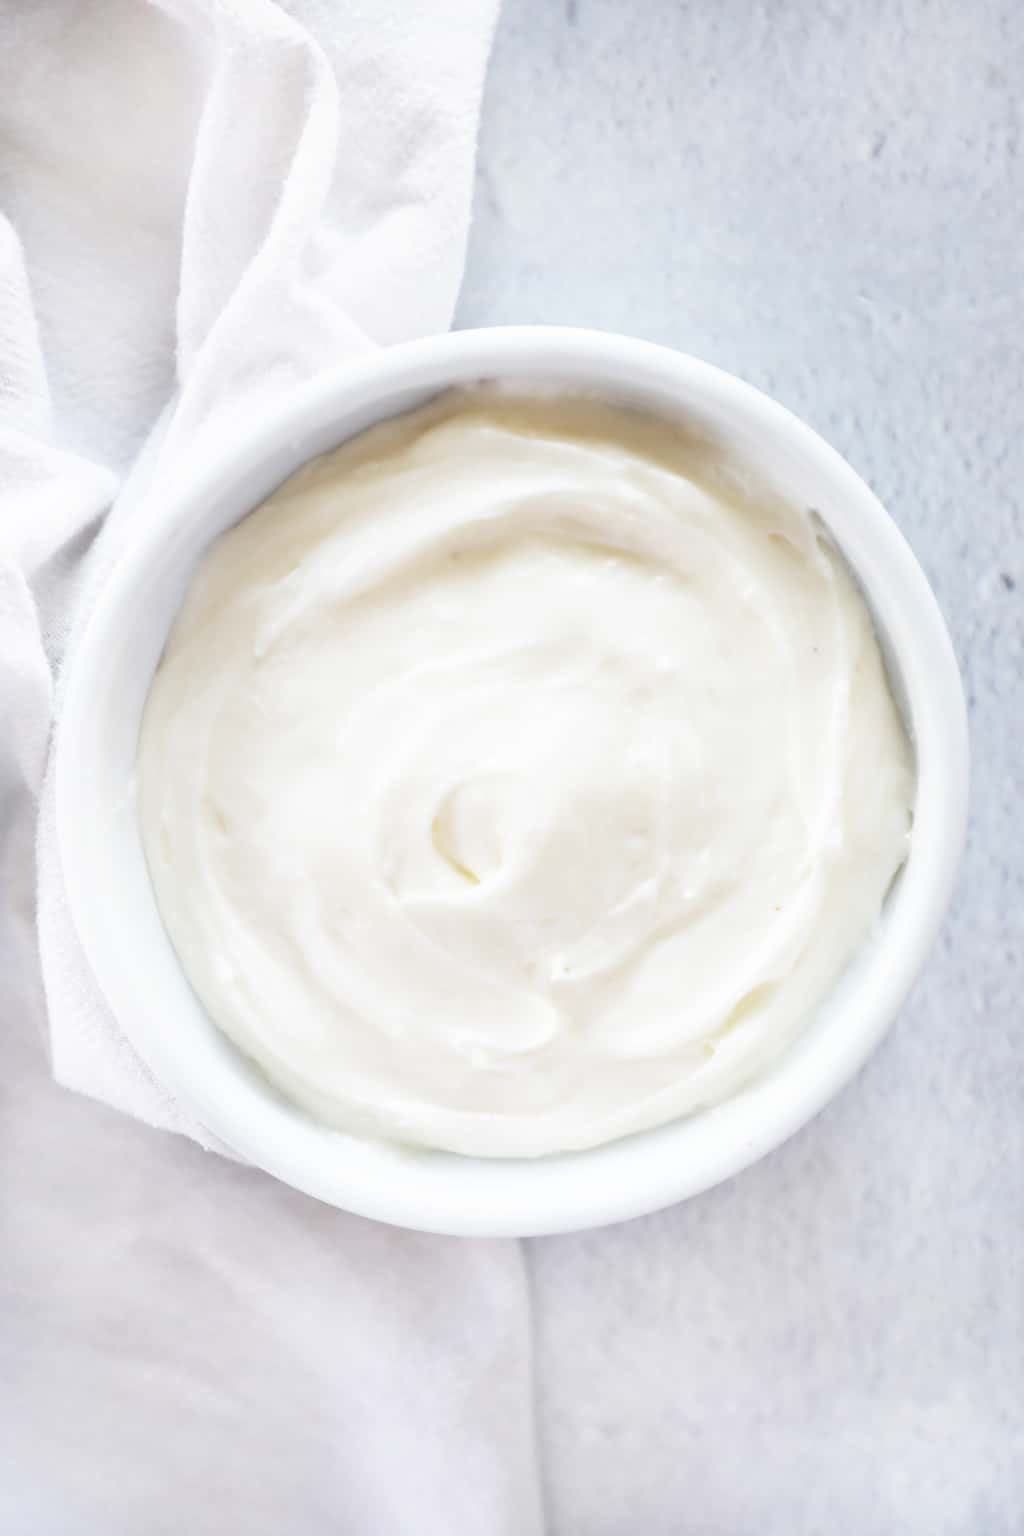 cream cheese frosting in a white bowl on a cement countertop